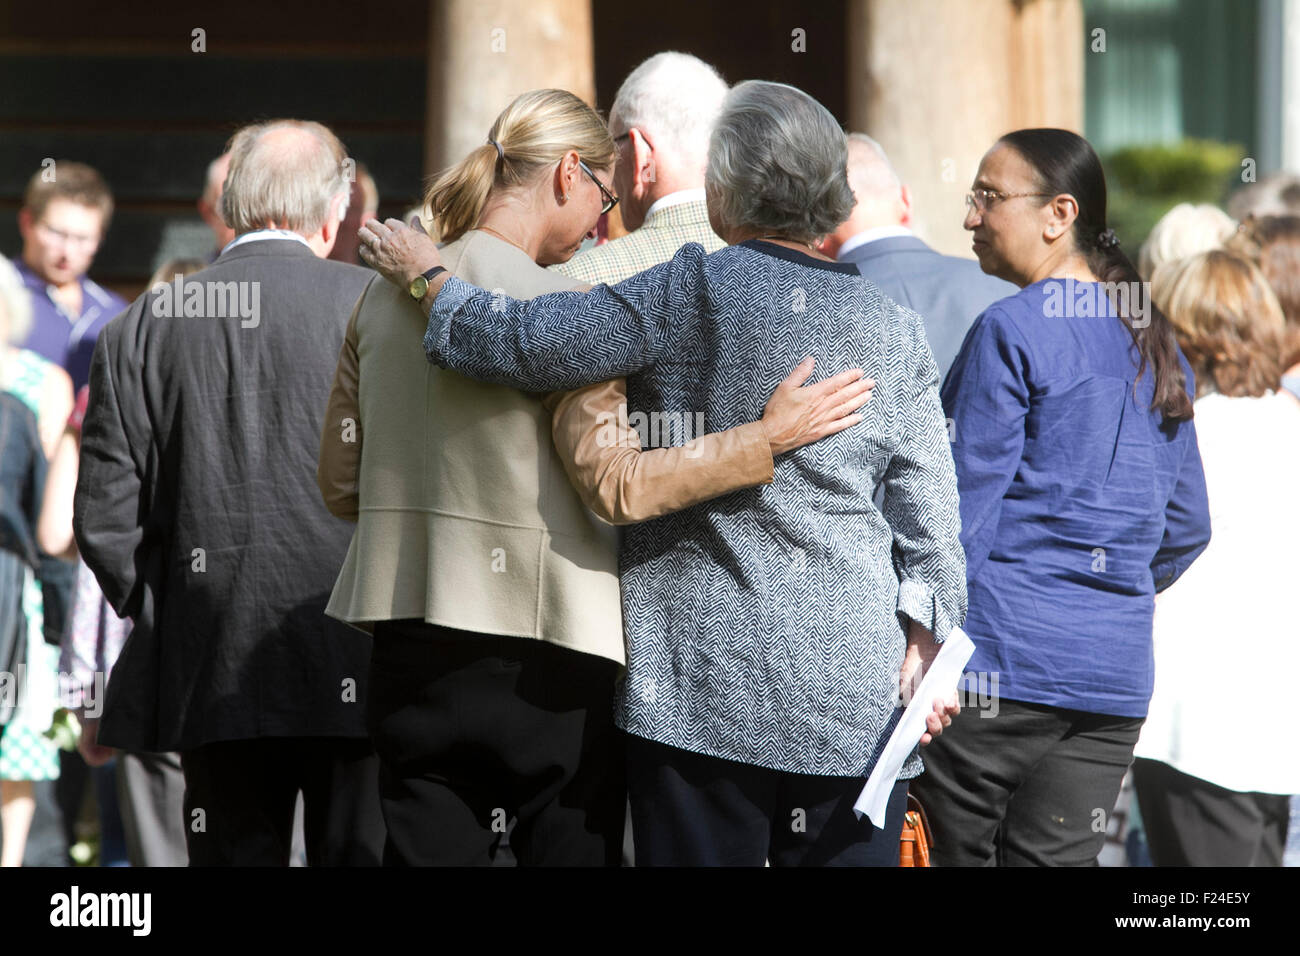 London, UK. 11th September, 2015. British relatives  at the London memorial  for the  victims  on the 14 th anniversary of the 911 terrorist attacks in New York and Washington DC. Credit:  amer ghazzal/Alamy Live News Stock Photo